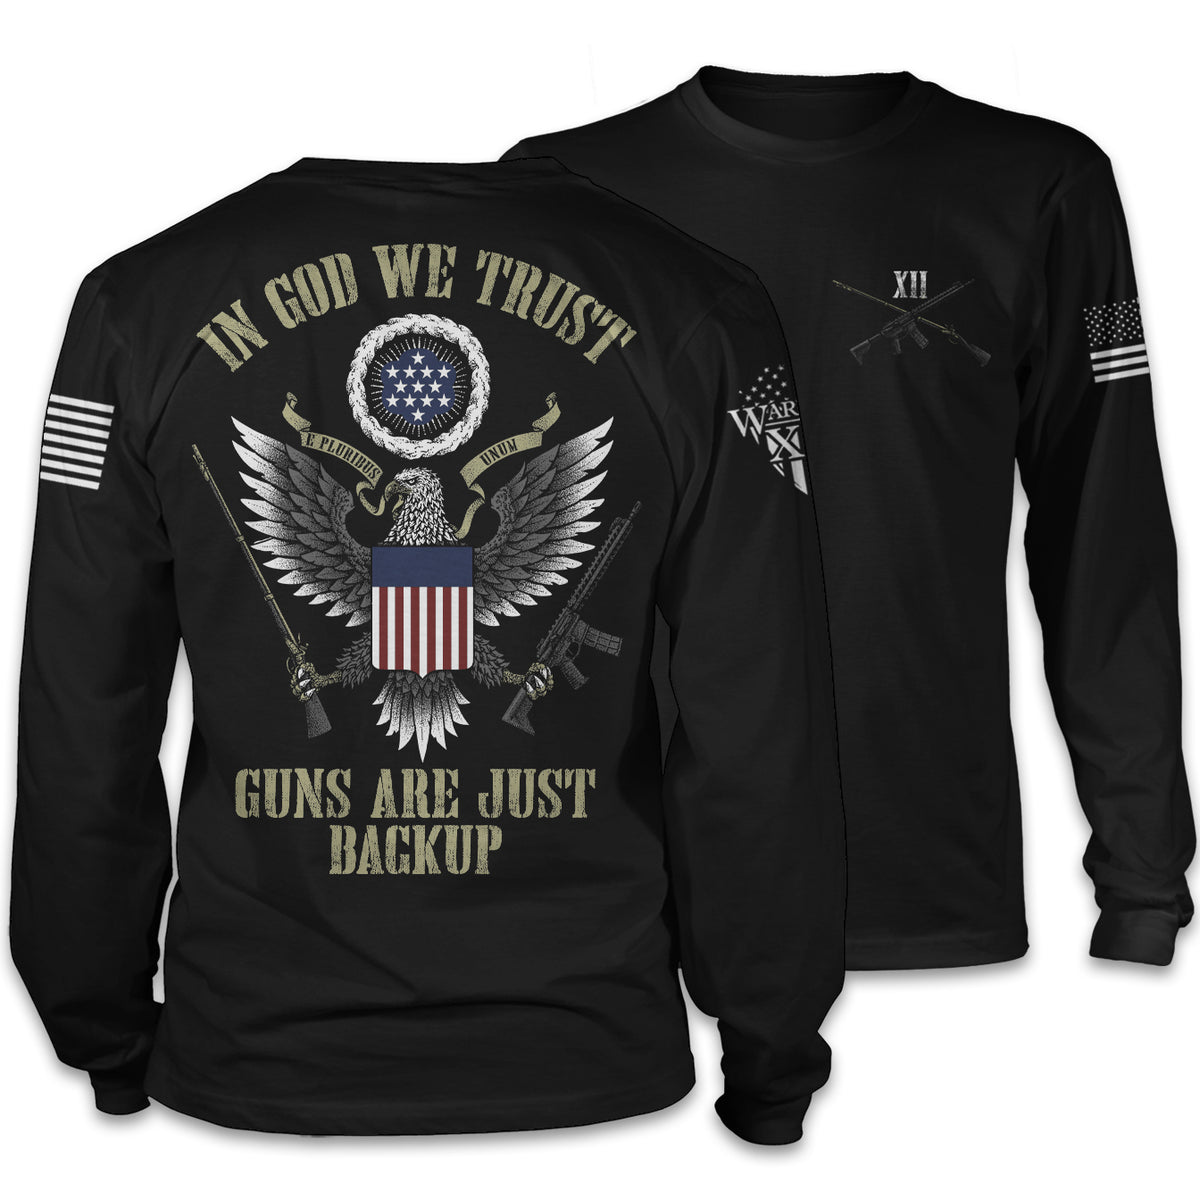 Front & back black long sleeve shirt with the words "In God we trust, guns are just backup" with an american eagle and the USA flag printed on the shirt.